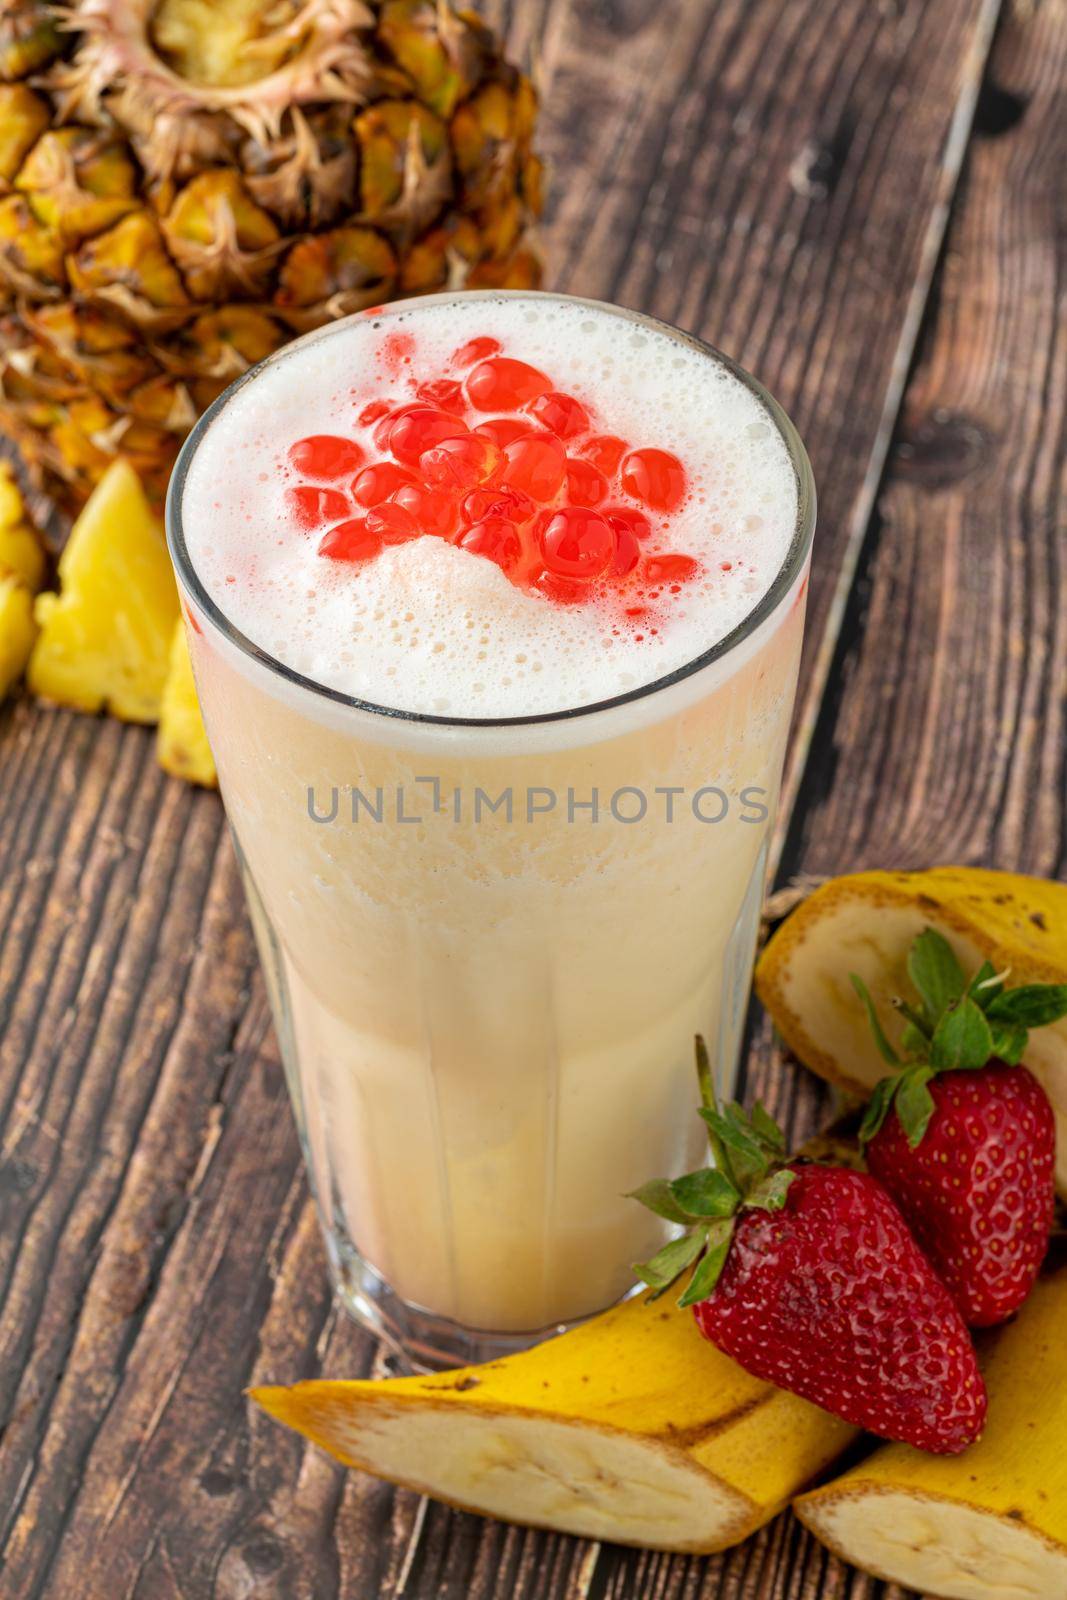 Banana, strawberry and pineapple smoothie on wooden table and bubble tea or boba tea balls on it